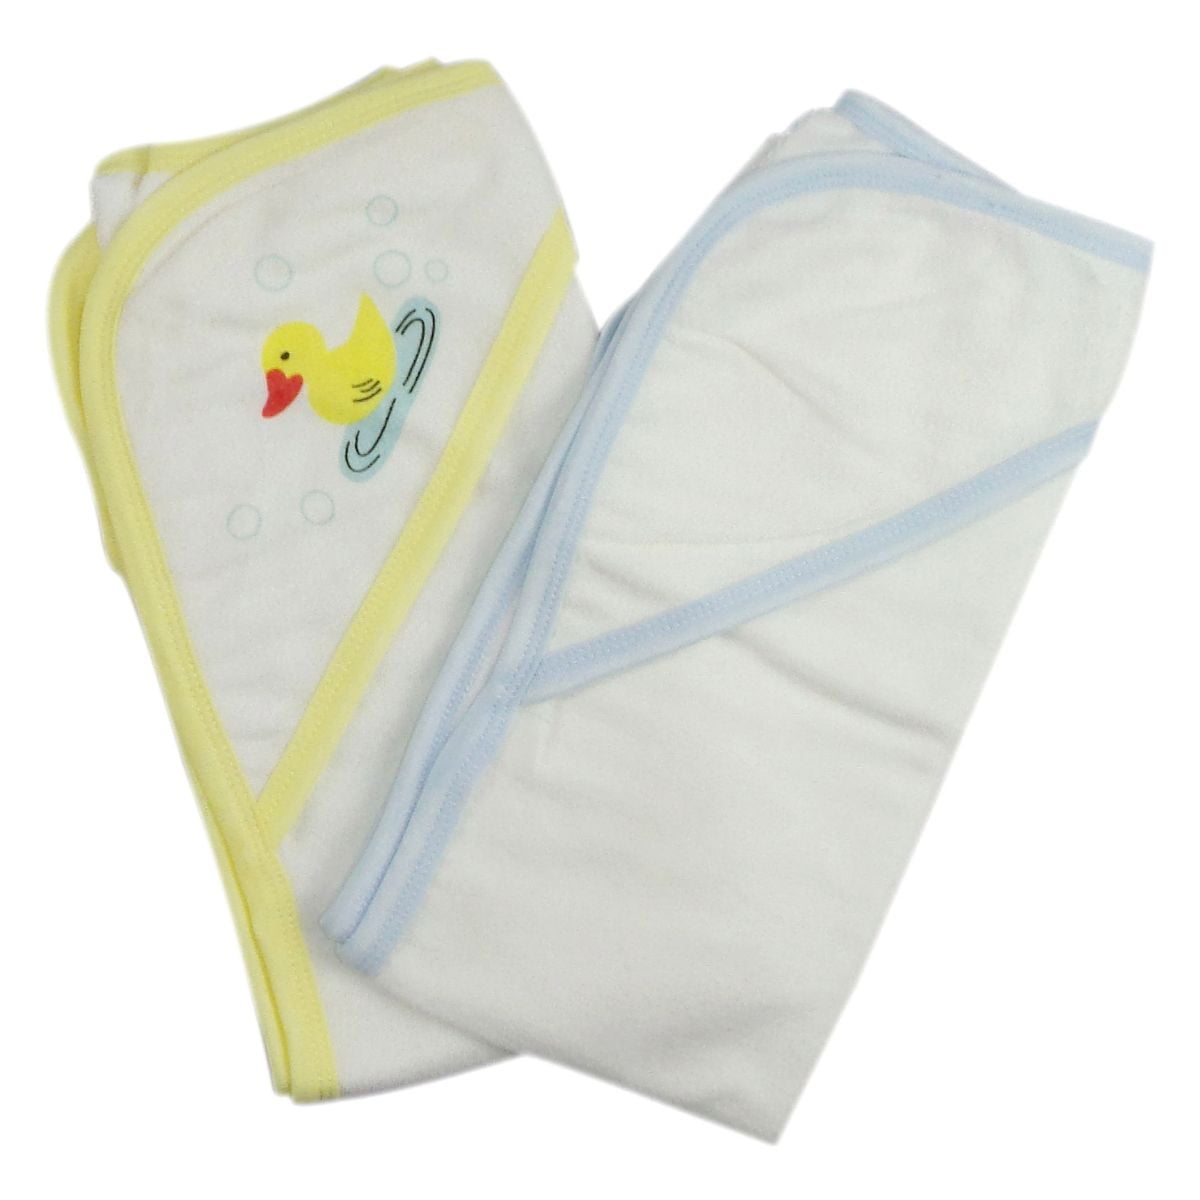 021-blue-021b-yellow Infant Hooded Bath Towel, White - Pack Of 2